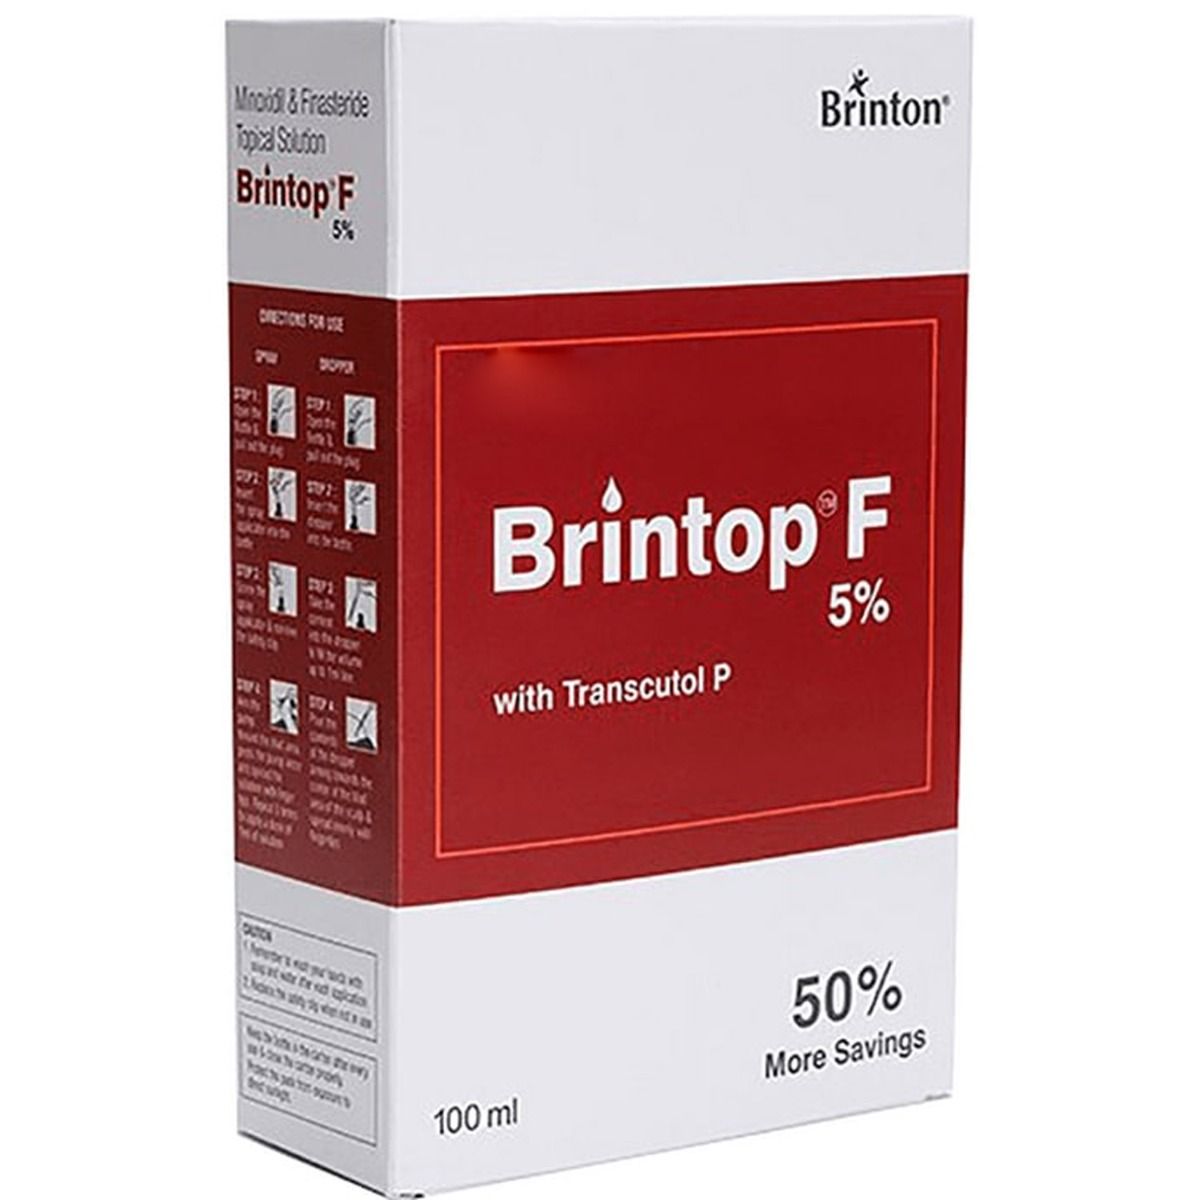 Brintop F 5% Topical Solution 100 ml Price, Uses, Side Effects, Composition  - Apollo Pharmacy